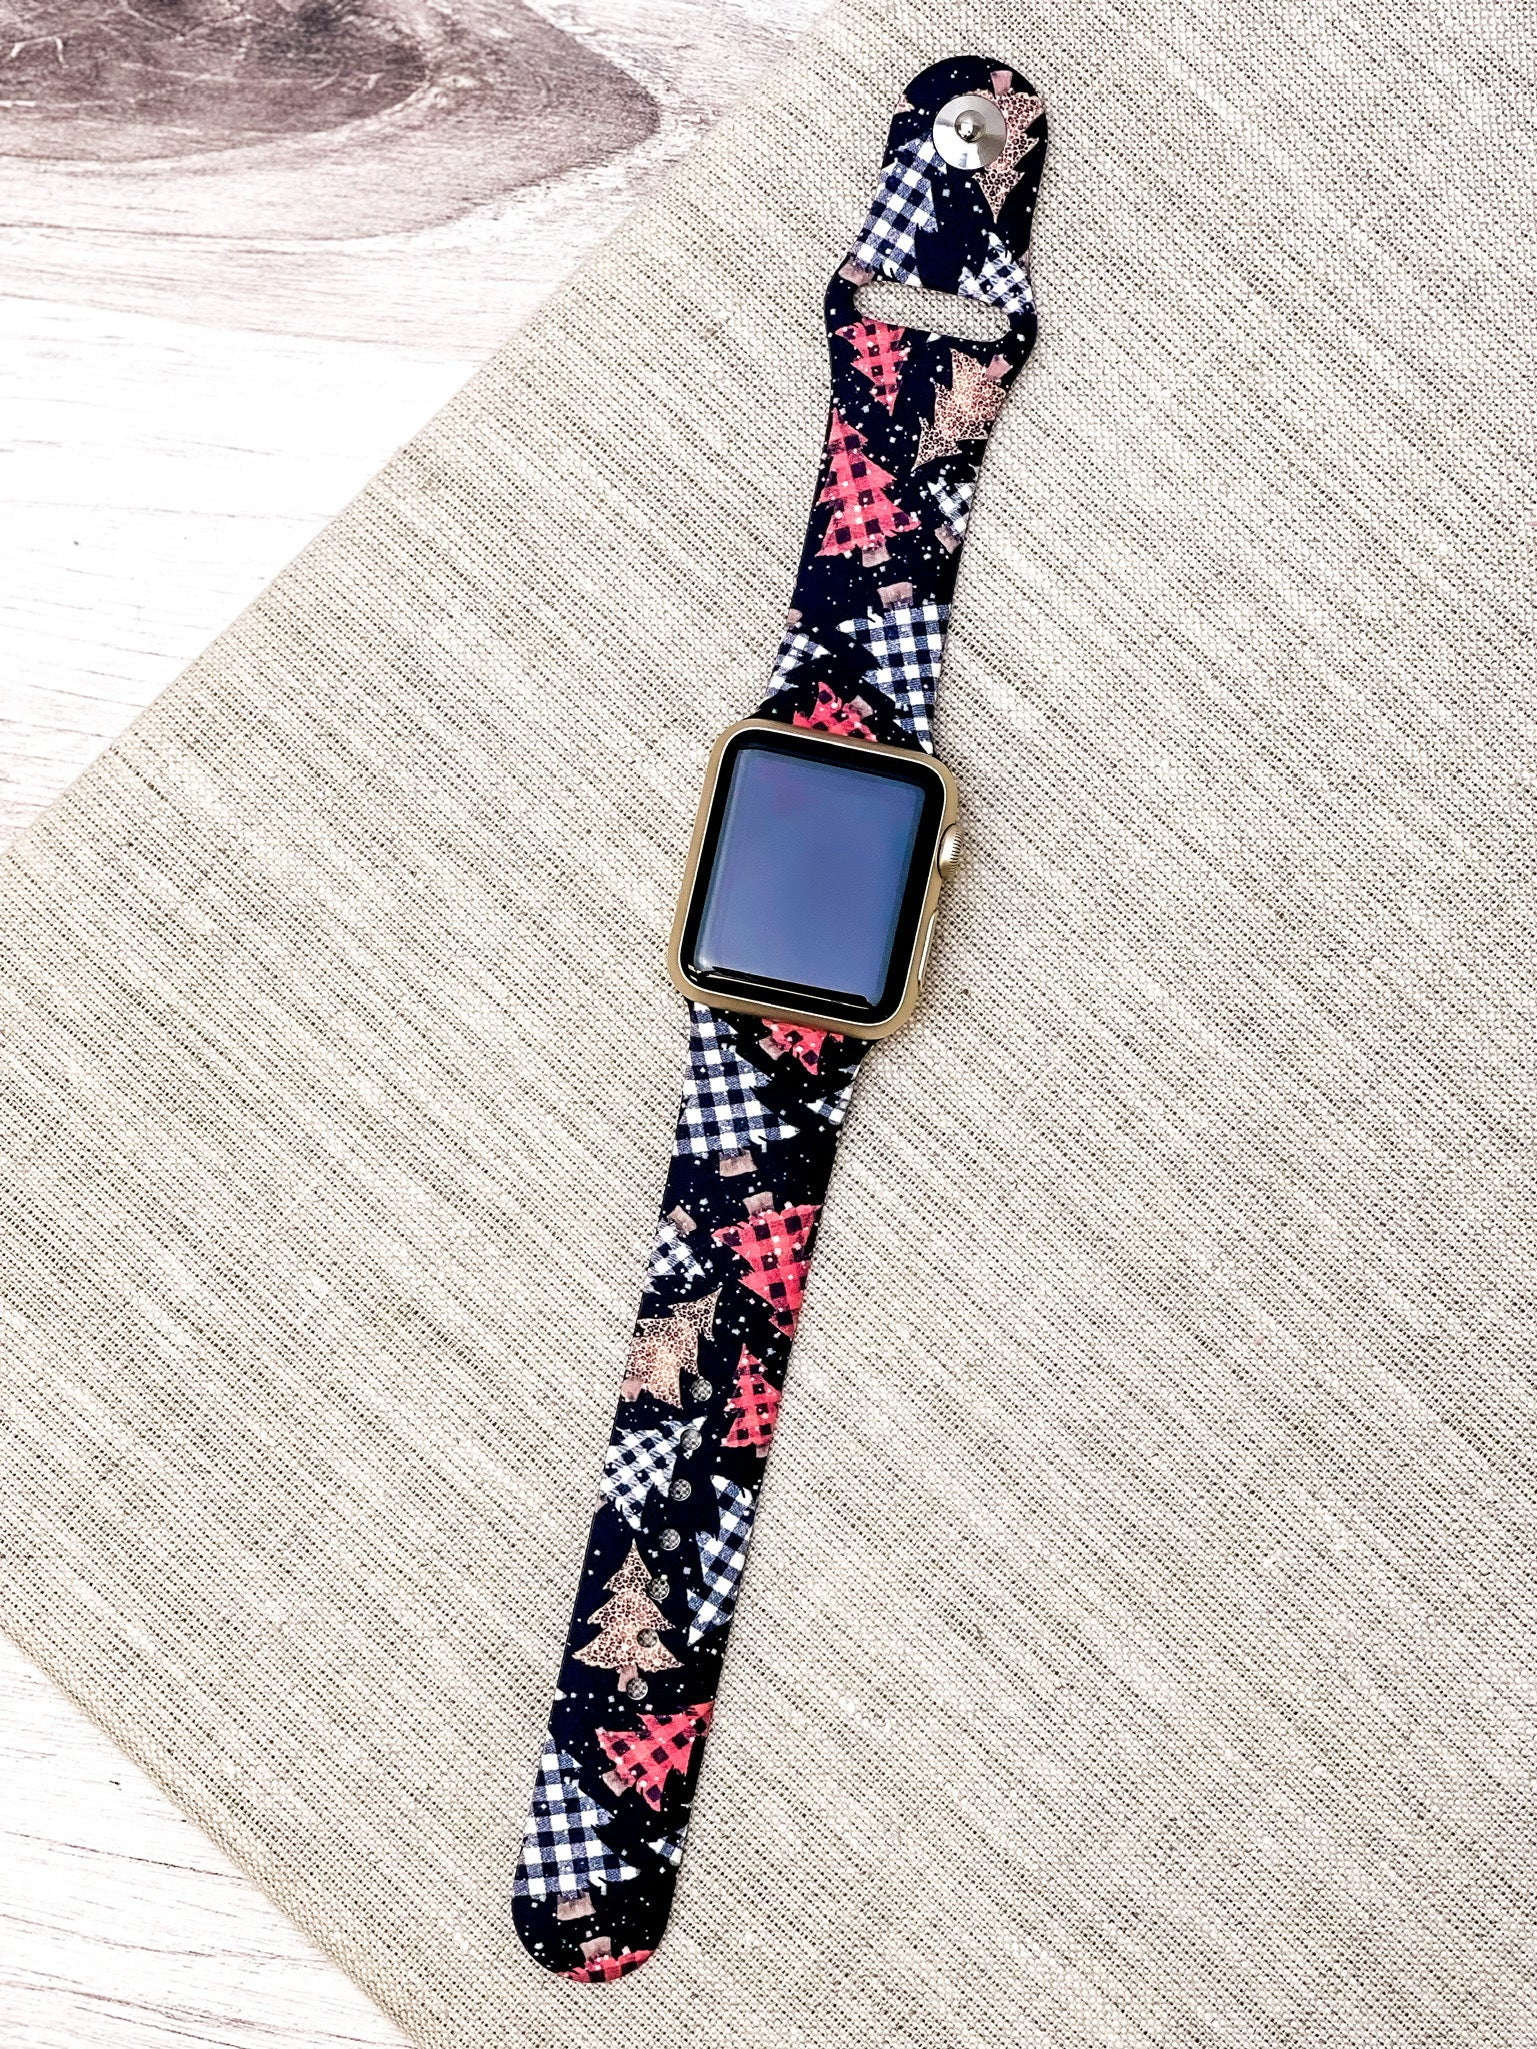 Silicone Checkered Pattern Smart Apple Watch Bands Wristband